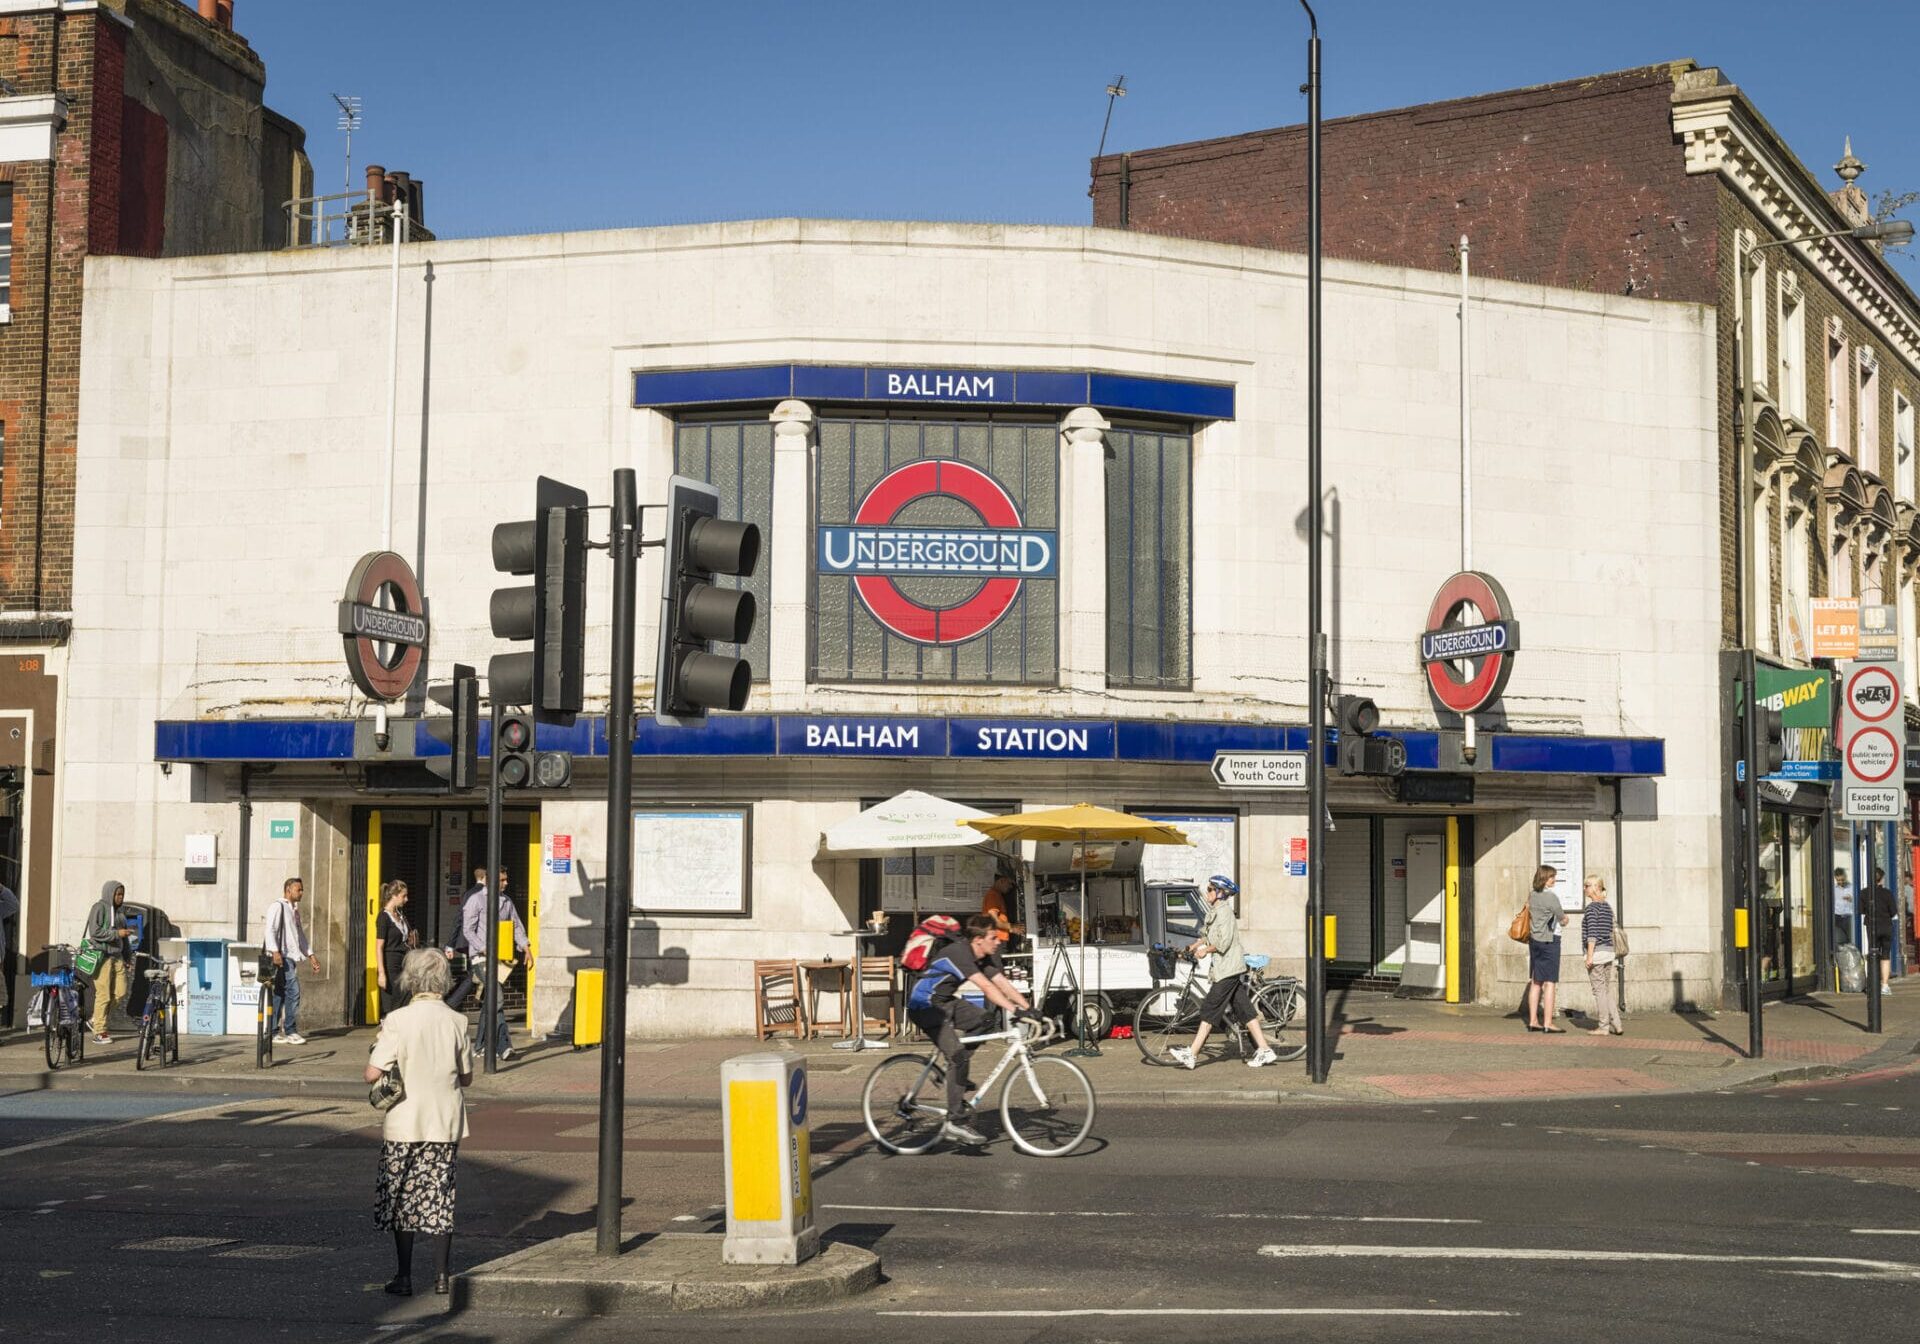 London, UK - September 5, 2012: People on the street and pavement in front of entrances to Balham Underground Station in South West London.